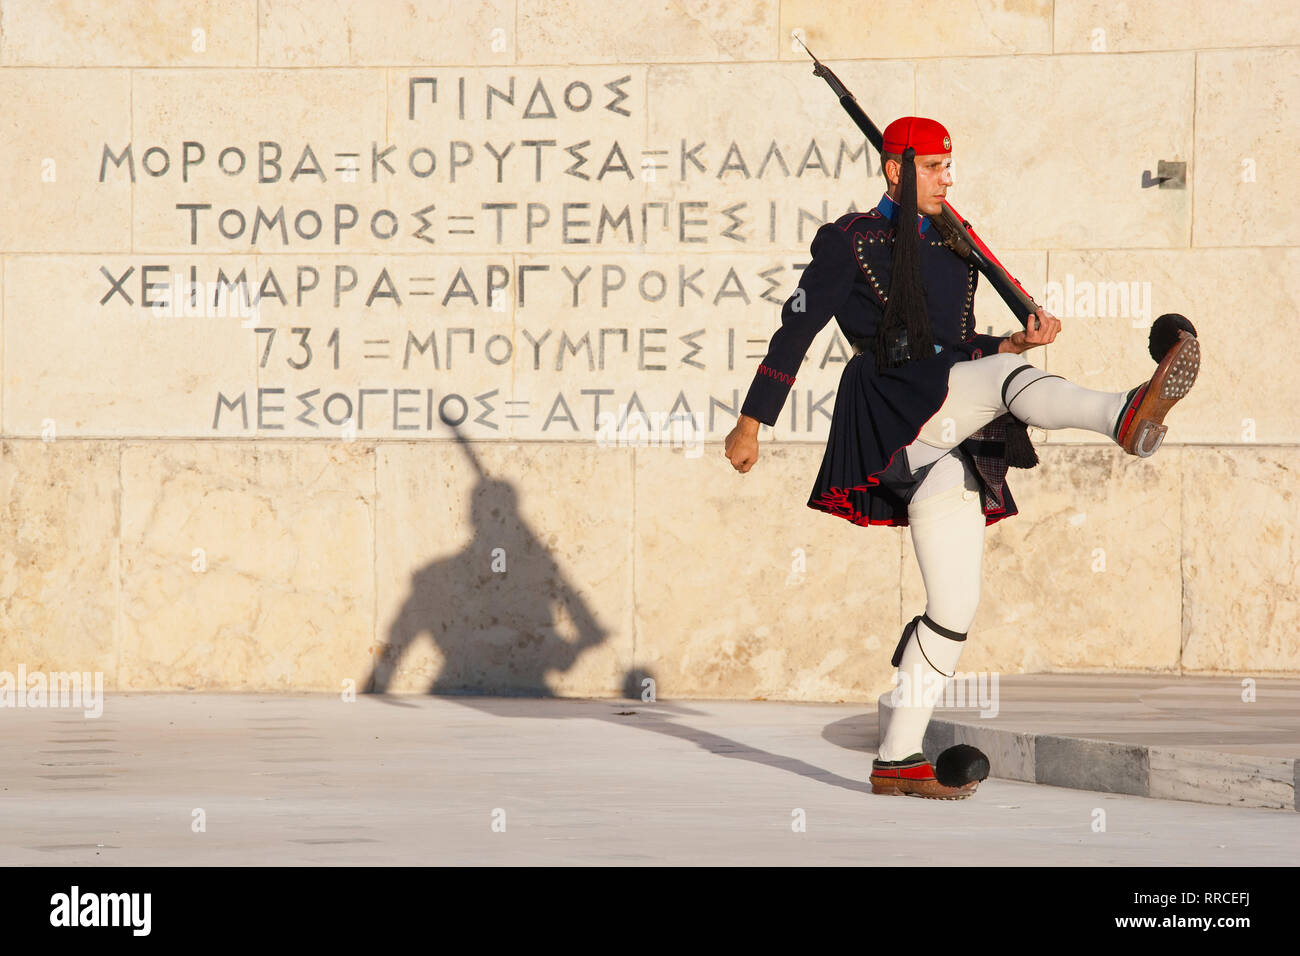 Greece, Attica, Athens, Evzones Greek soldier on parade outside the Parliament building. Stock Photo